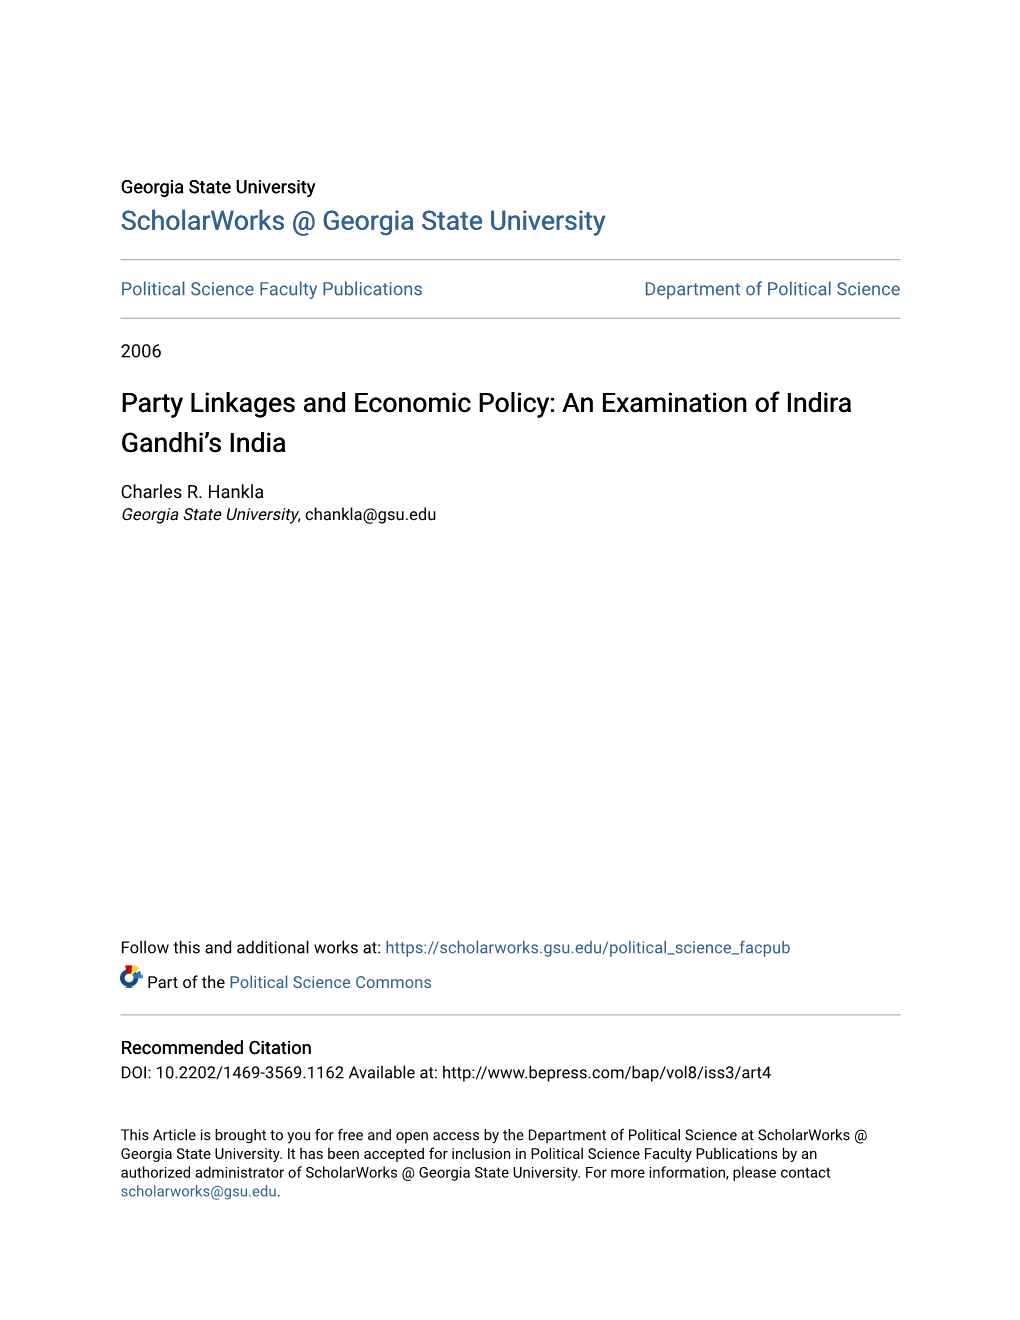 Party Linkages and Economic Policy: an Examination of Indira Gandhi's India